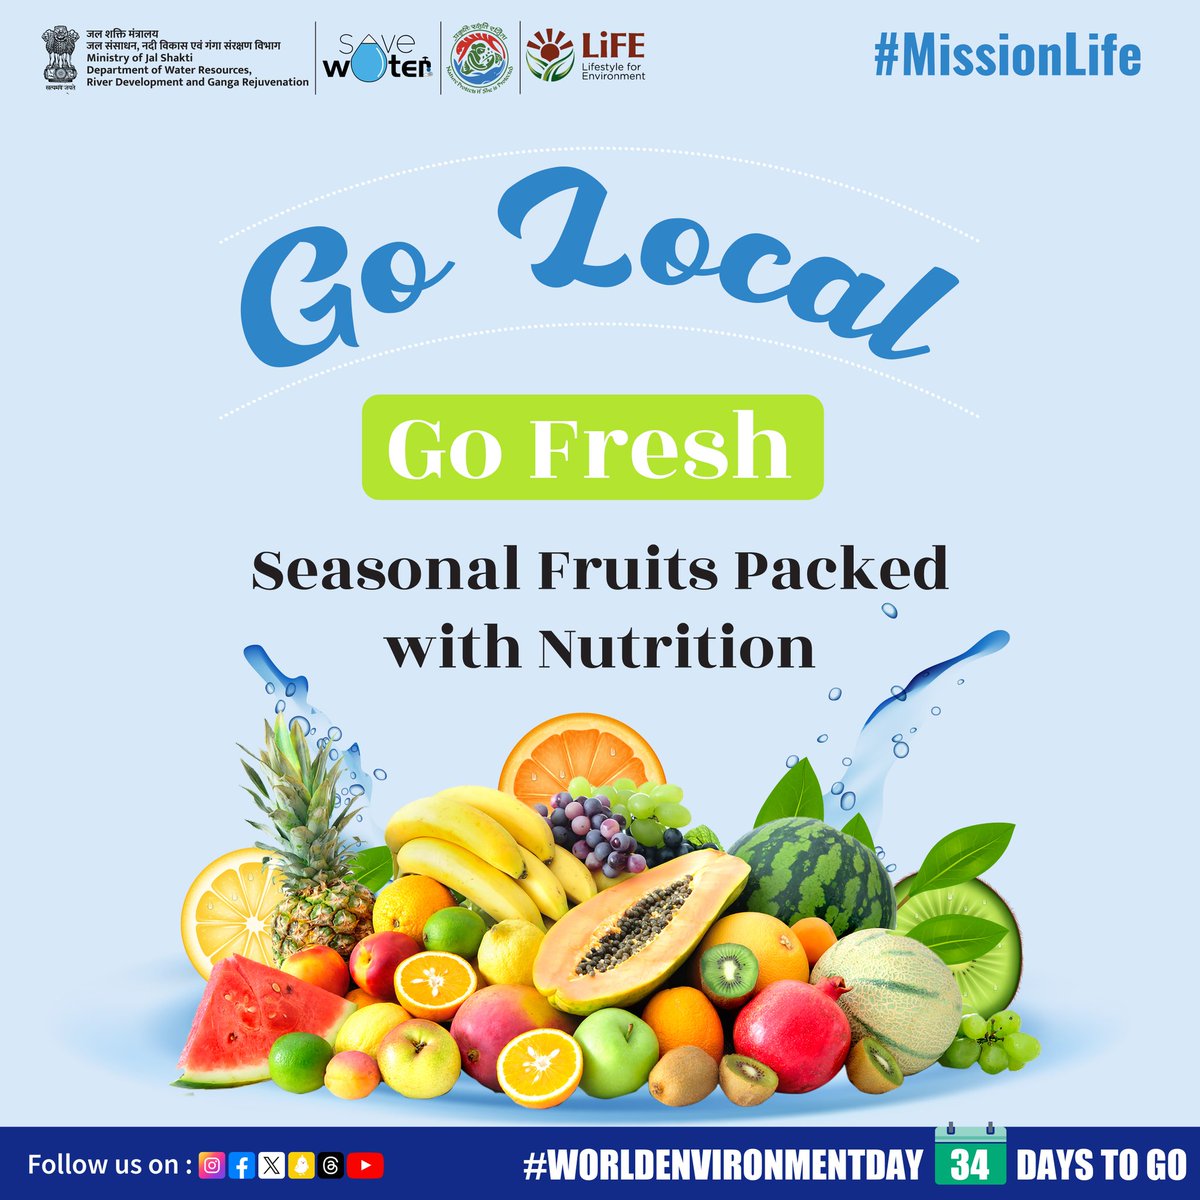 Nature's perfect timing! Seasonal produce bursts with flavor & #nutrients. They're fresher, support local farmers, & reduce your #carbonfootprint. It's a win-win for your health & #MissionLiFE! #ProPlanetPeople #WED #DoWR